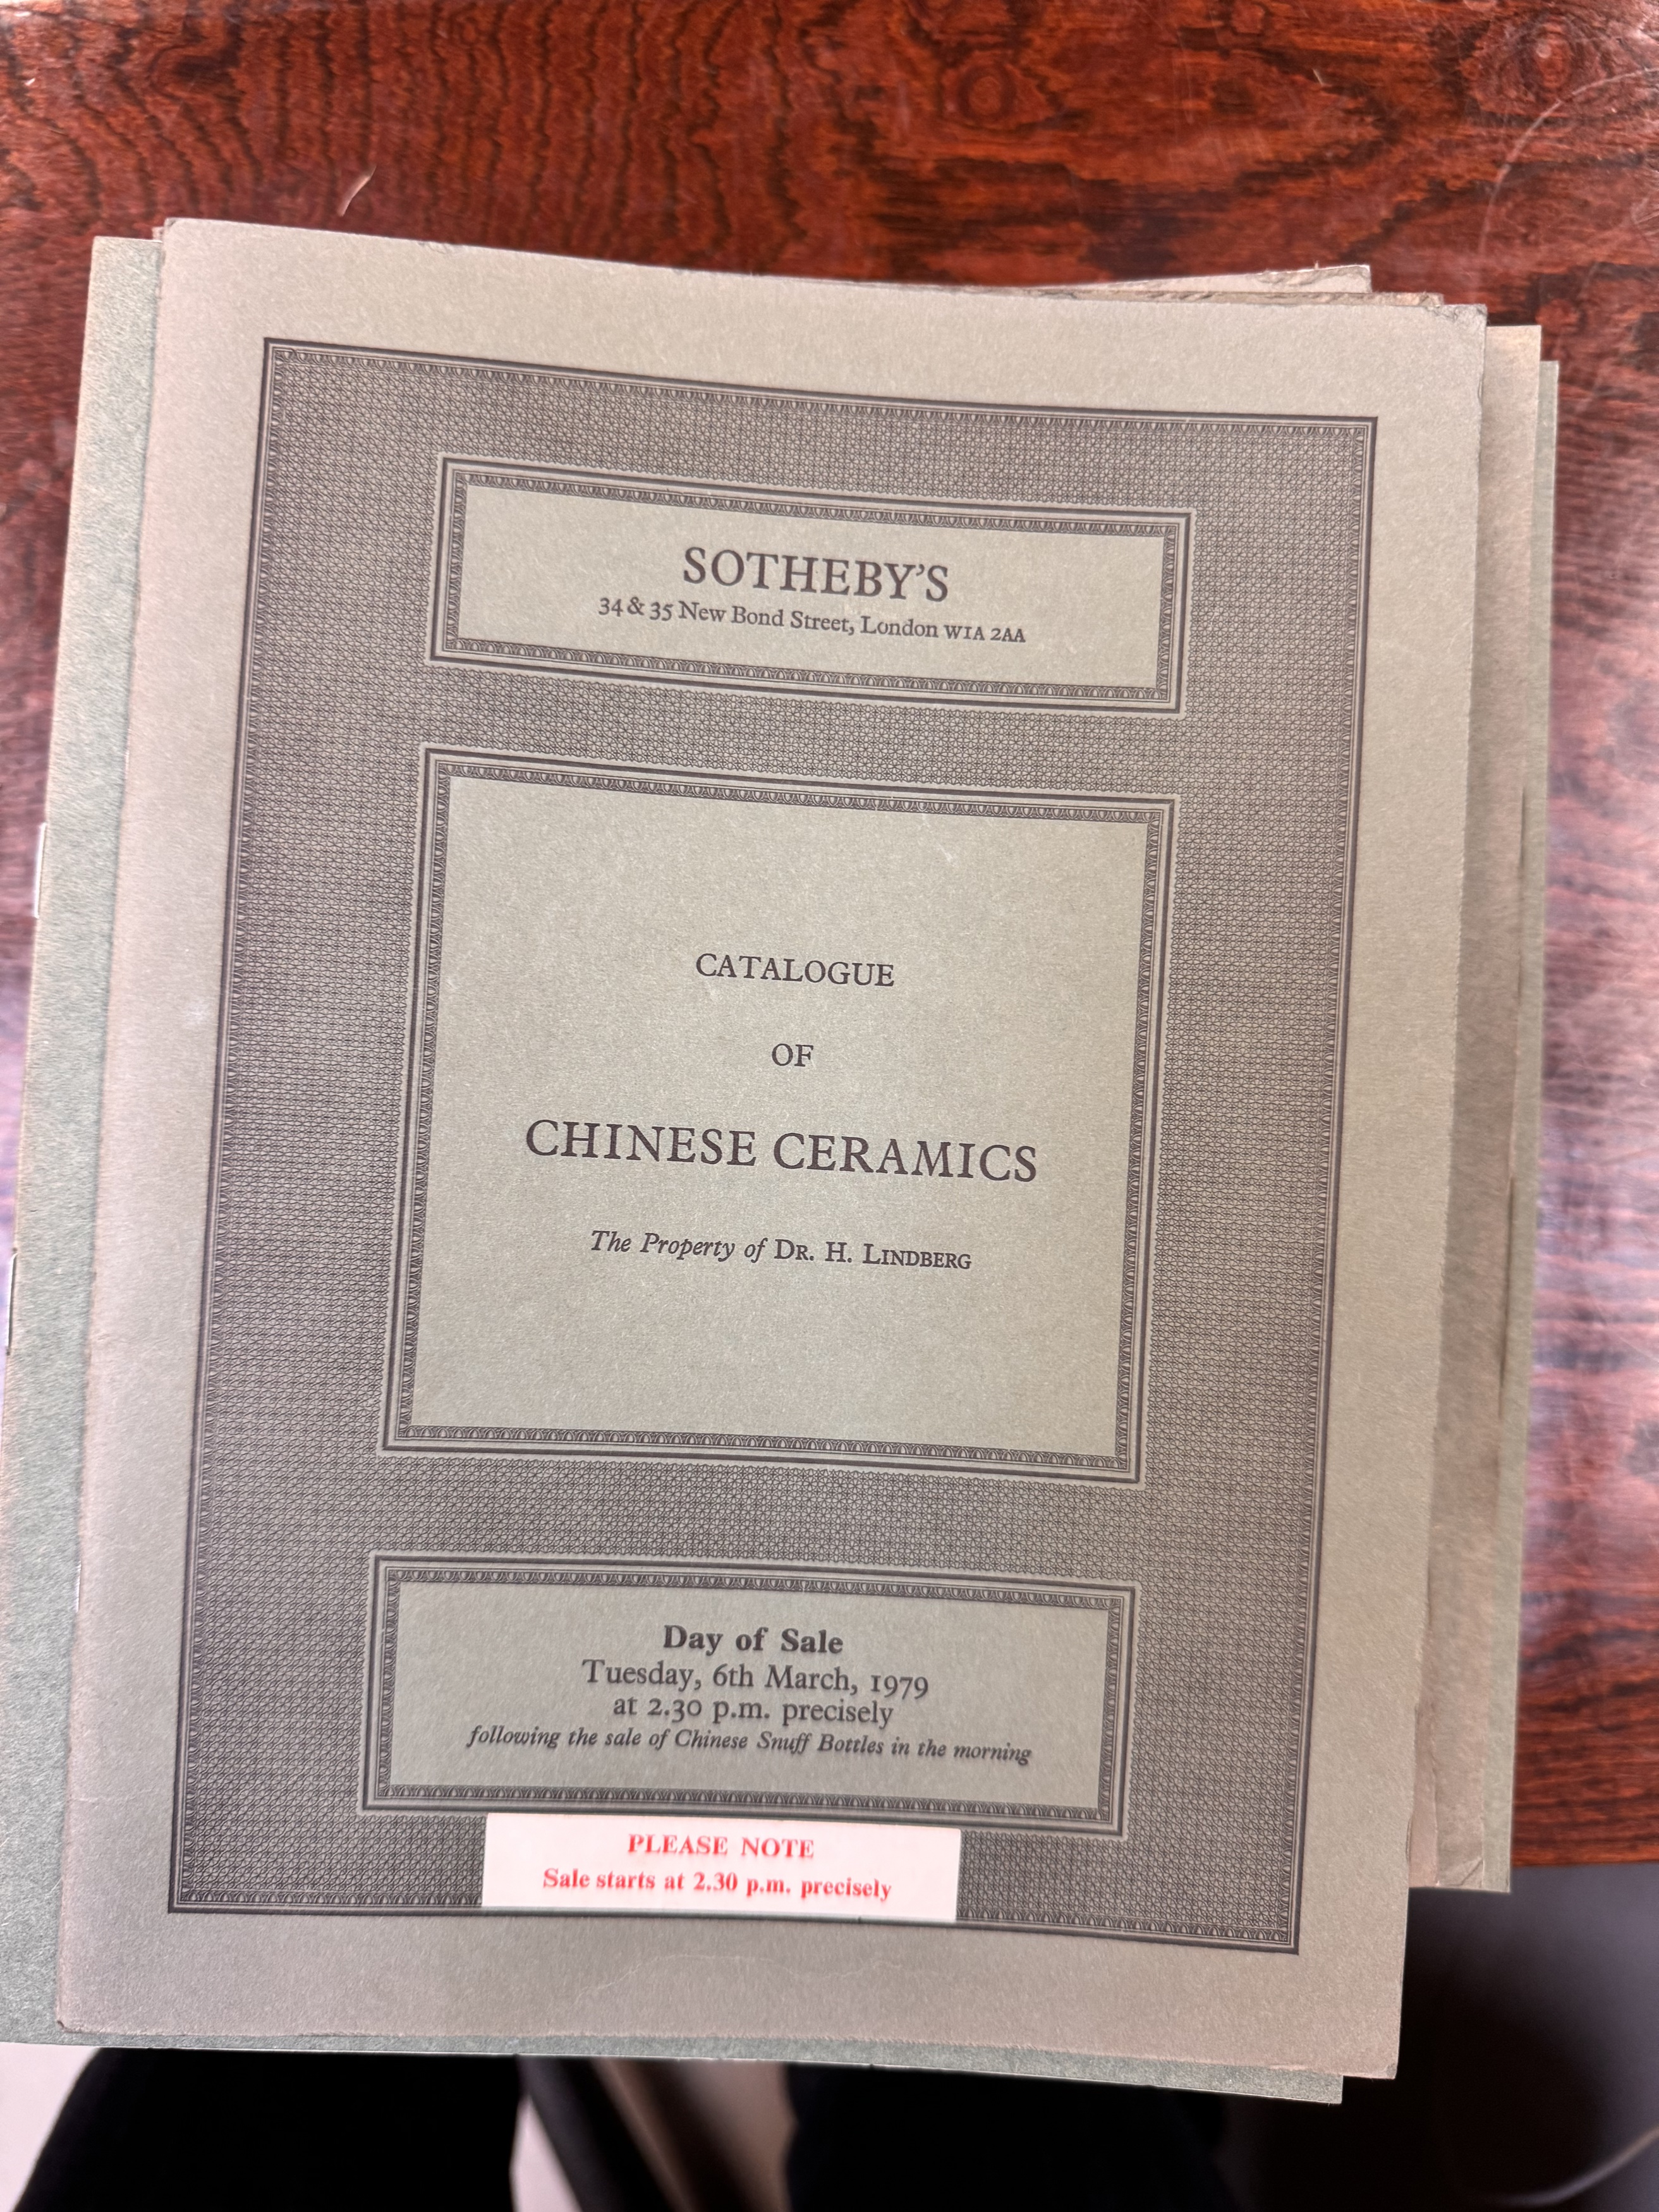 A LARGE COLLECTION OF EARLY SOTHEBY'S CHINESE ART CATALOGUES (50 VOLUMES) 早期蘇富比國藝術品硬面精裝拍賣圖錄一組 - Image 16 of 50